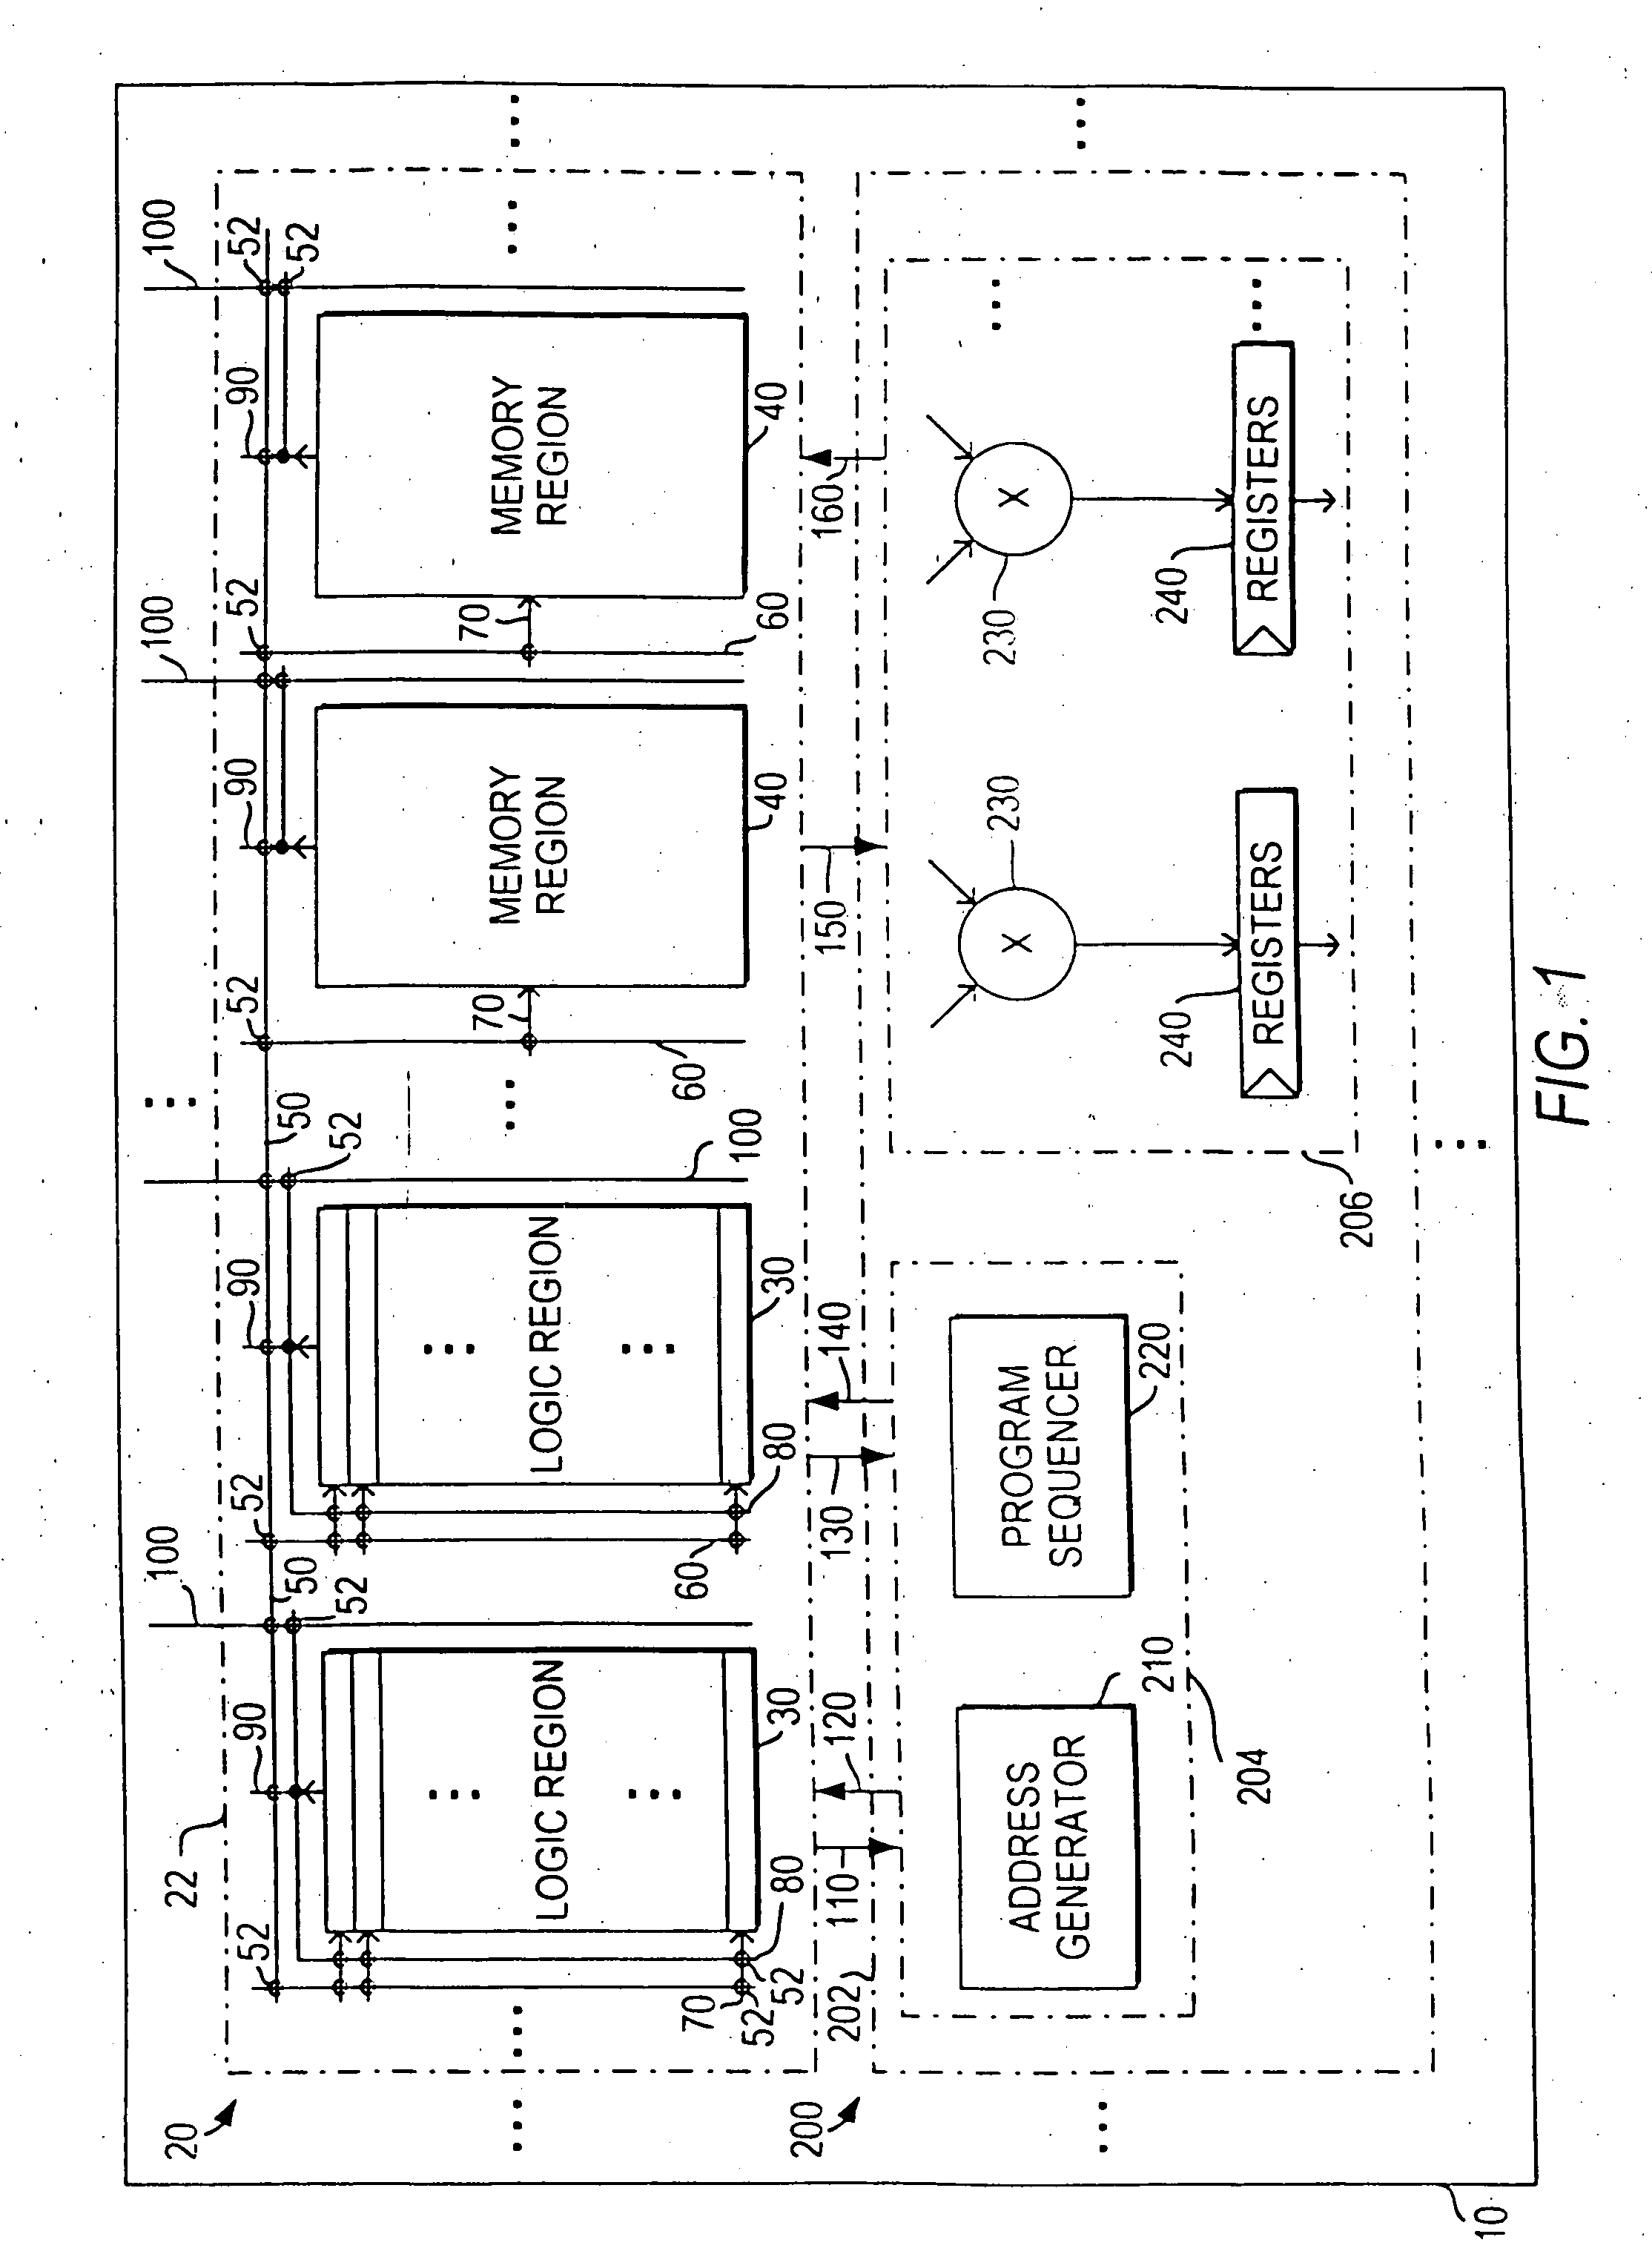 Programmable logic integrated circuit devices including dedicated processor components and hard-wired functional units